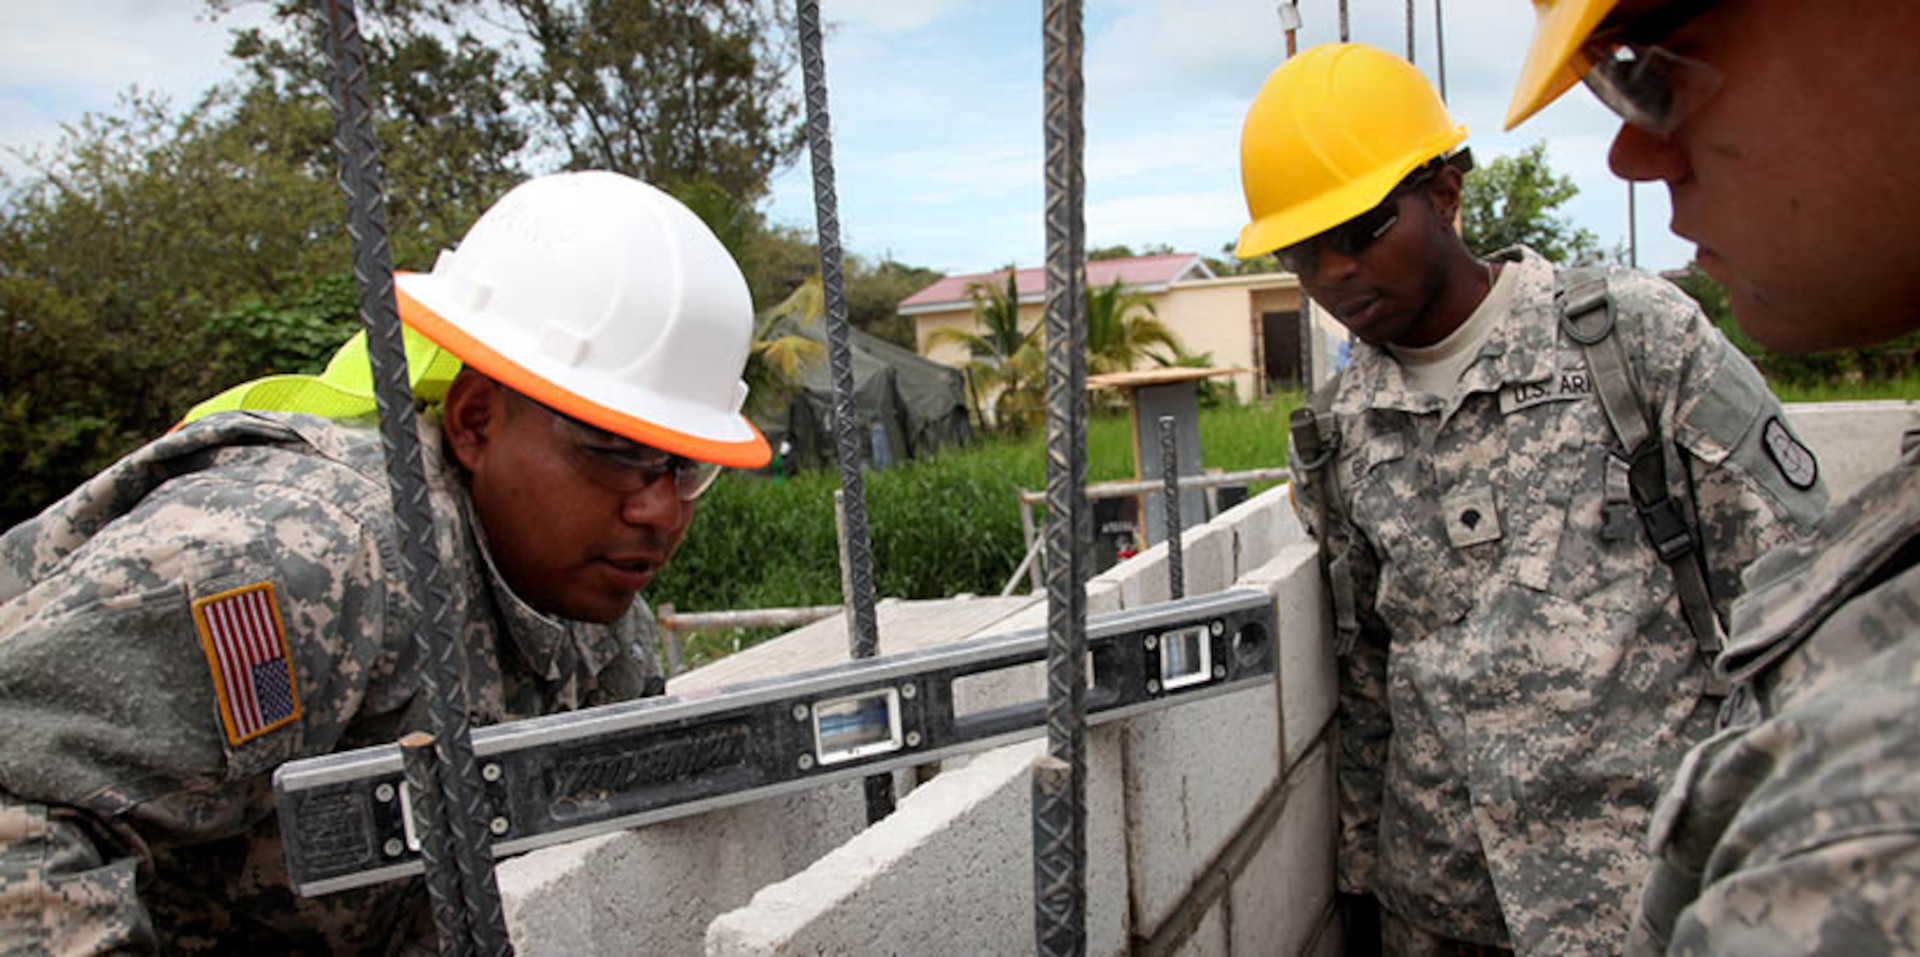 U.S. Soldiers with the 808th Engineer Company, check to insure that a cinder block wall is level while working at a construction site for a new health clinic at Ladyville, Belize, April 13, 2017. Soldiers with the 808th are building a new clinic at the Ladyville Health Center as a part of Beyond the Horizon 2017. A total of five construction projects will take place during the exercise. BTH 2017 is a U.S. Southern Command-sponsored, Army South-led exercise designed to provide humanitarian and engineering services to communities in need, demonstrating U.S. support for Belize. (U.S. Army Photo by Sgt. Joshua E. Powell)